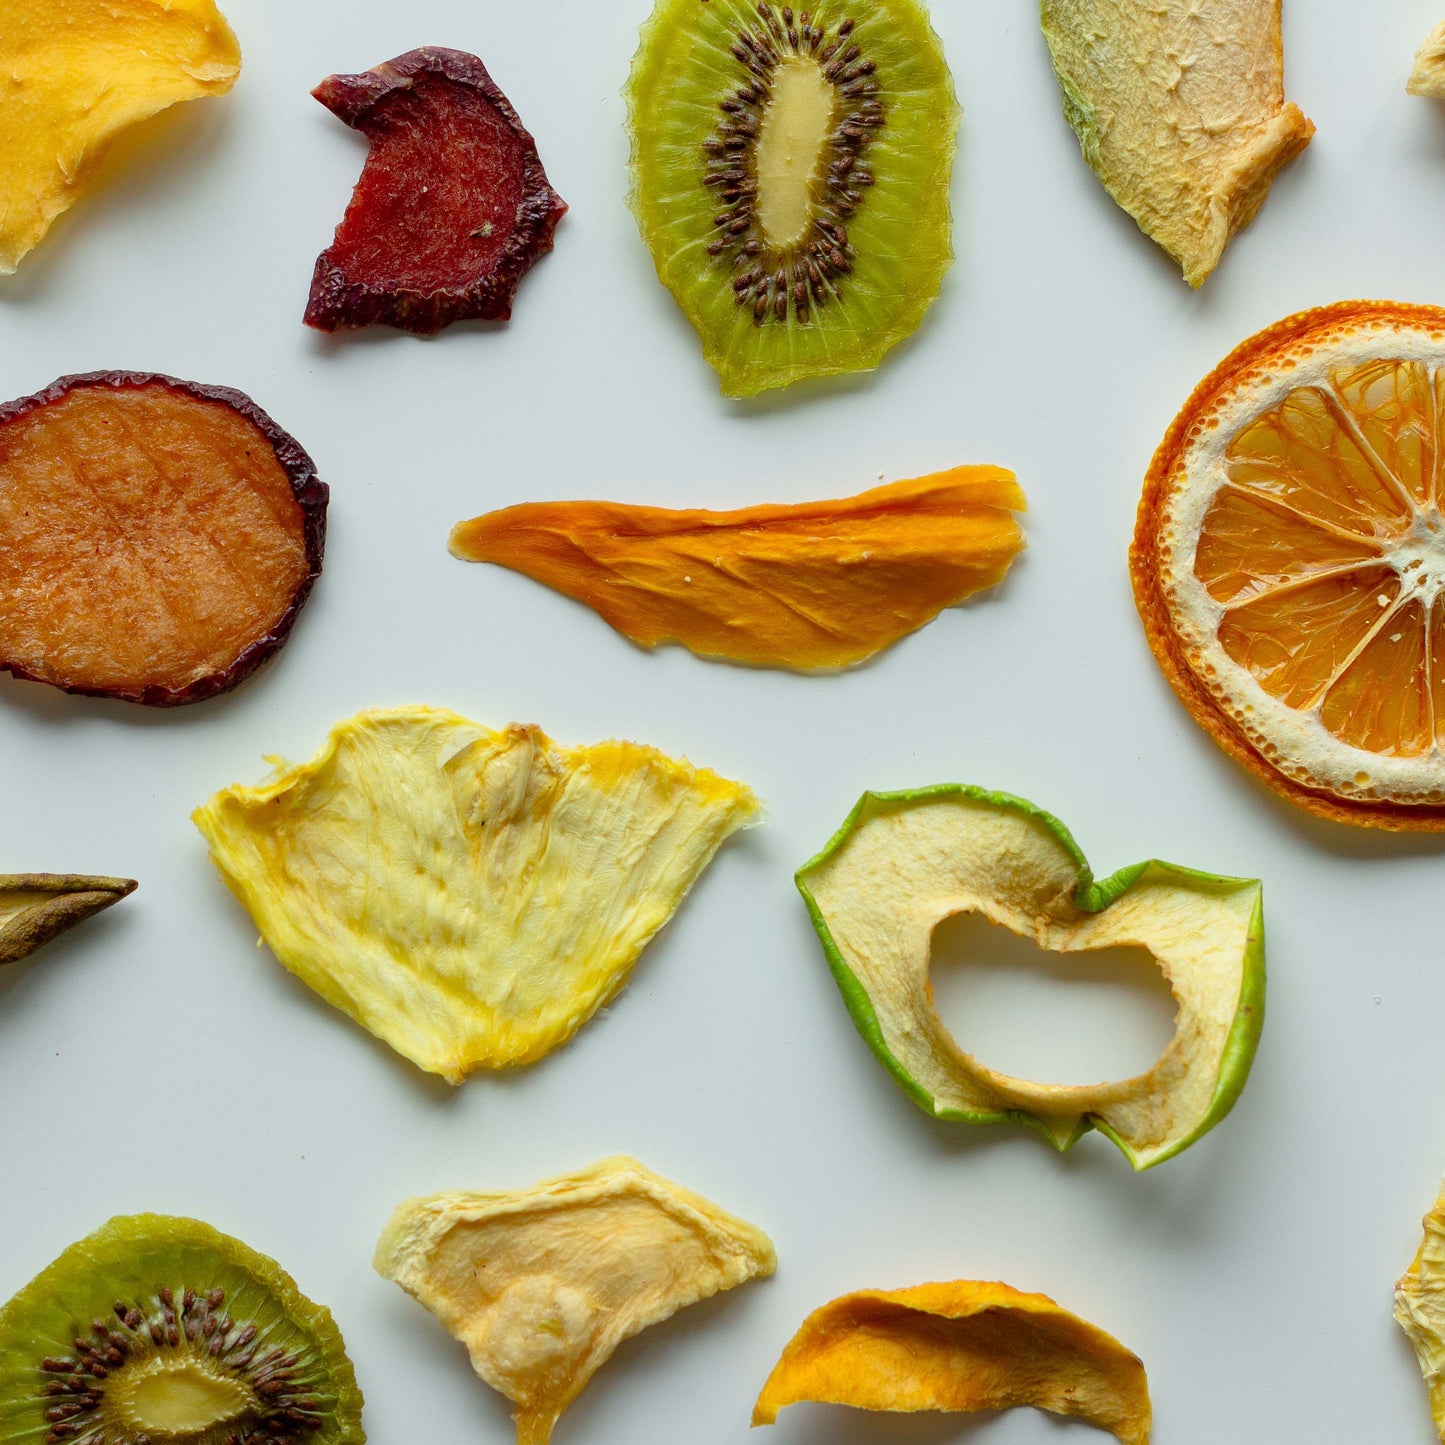 EXPLORE THE WORLD OF DRIED FRUITS!